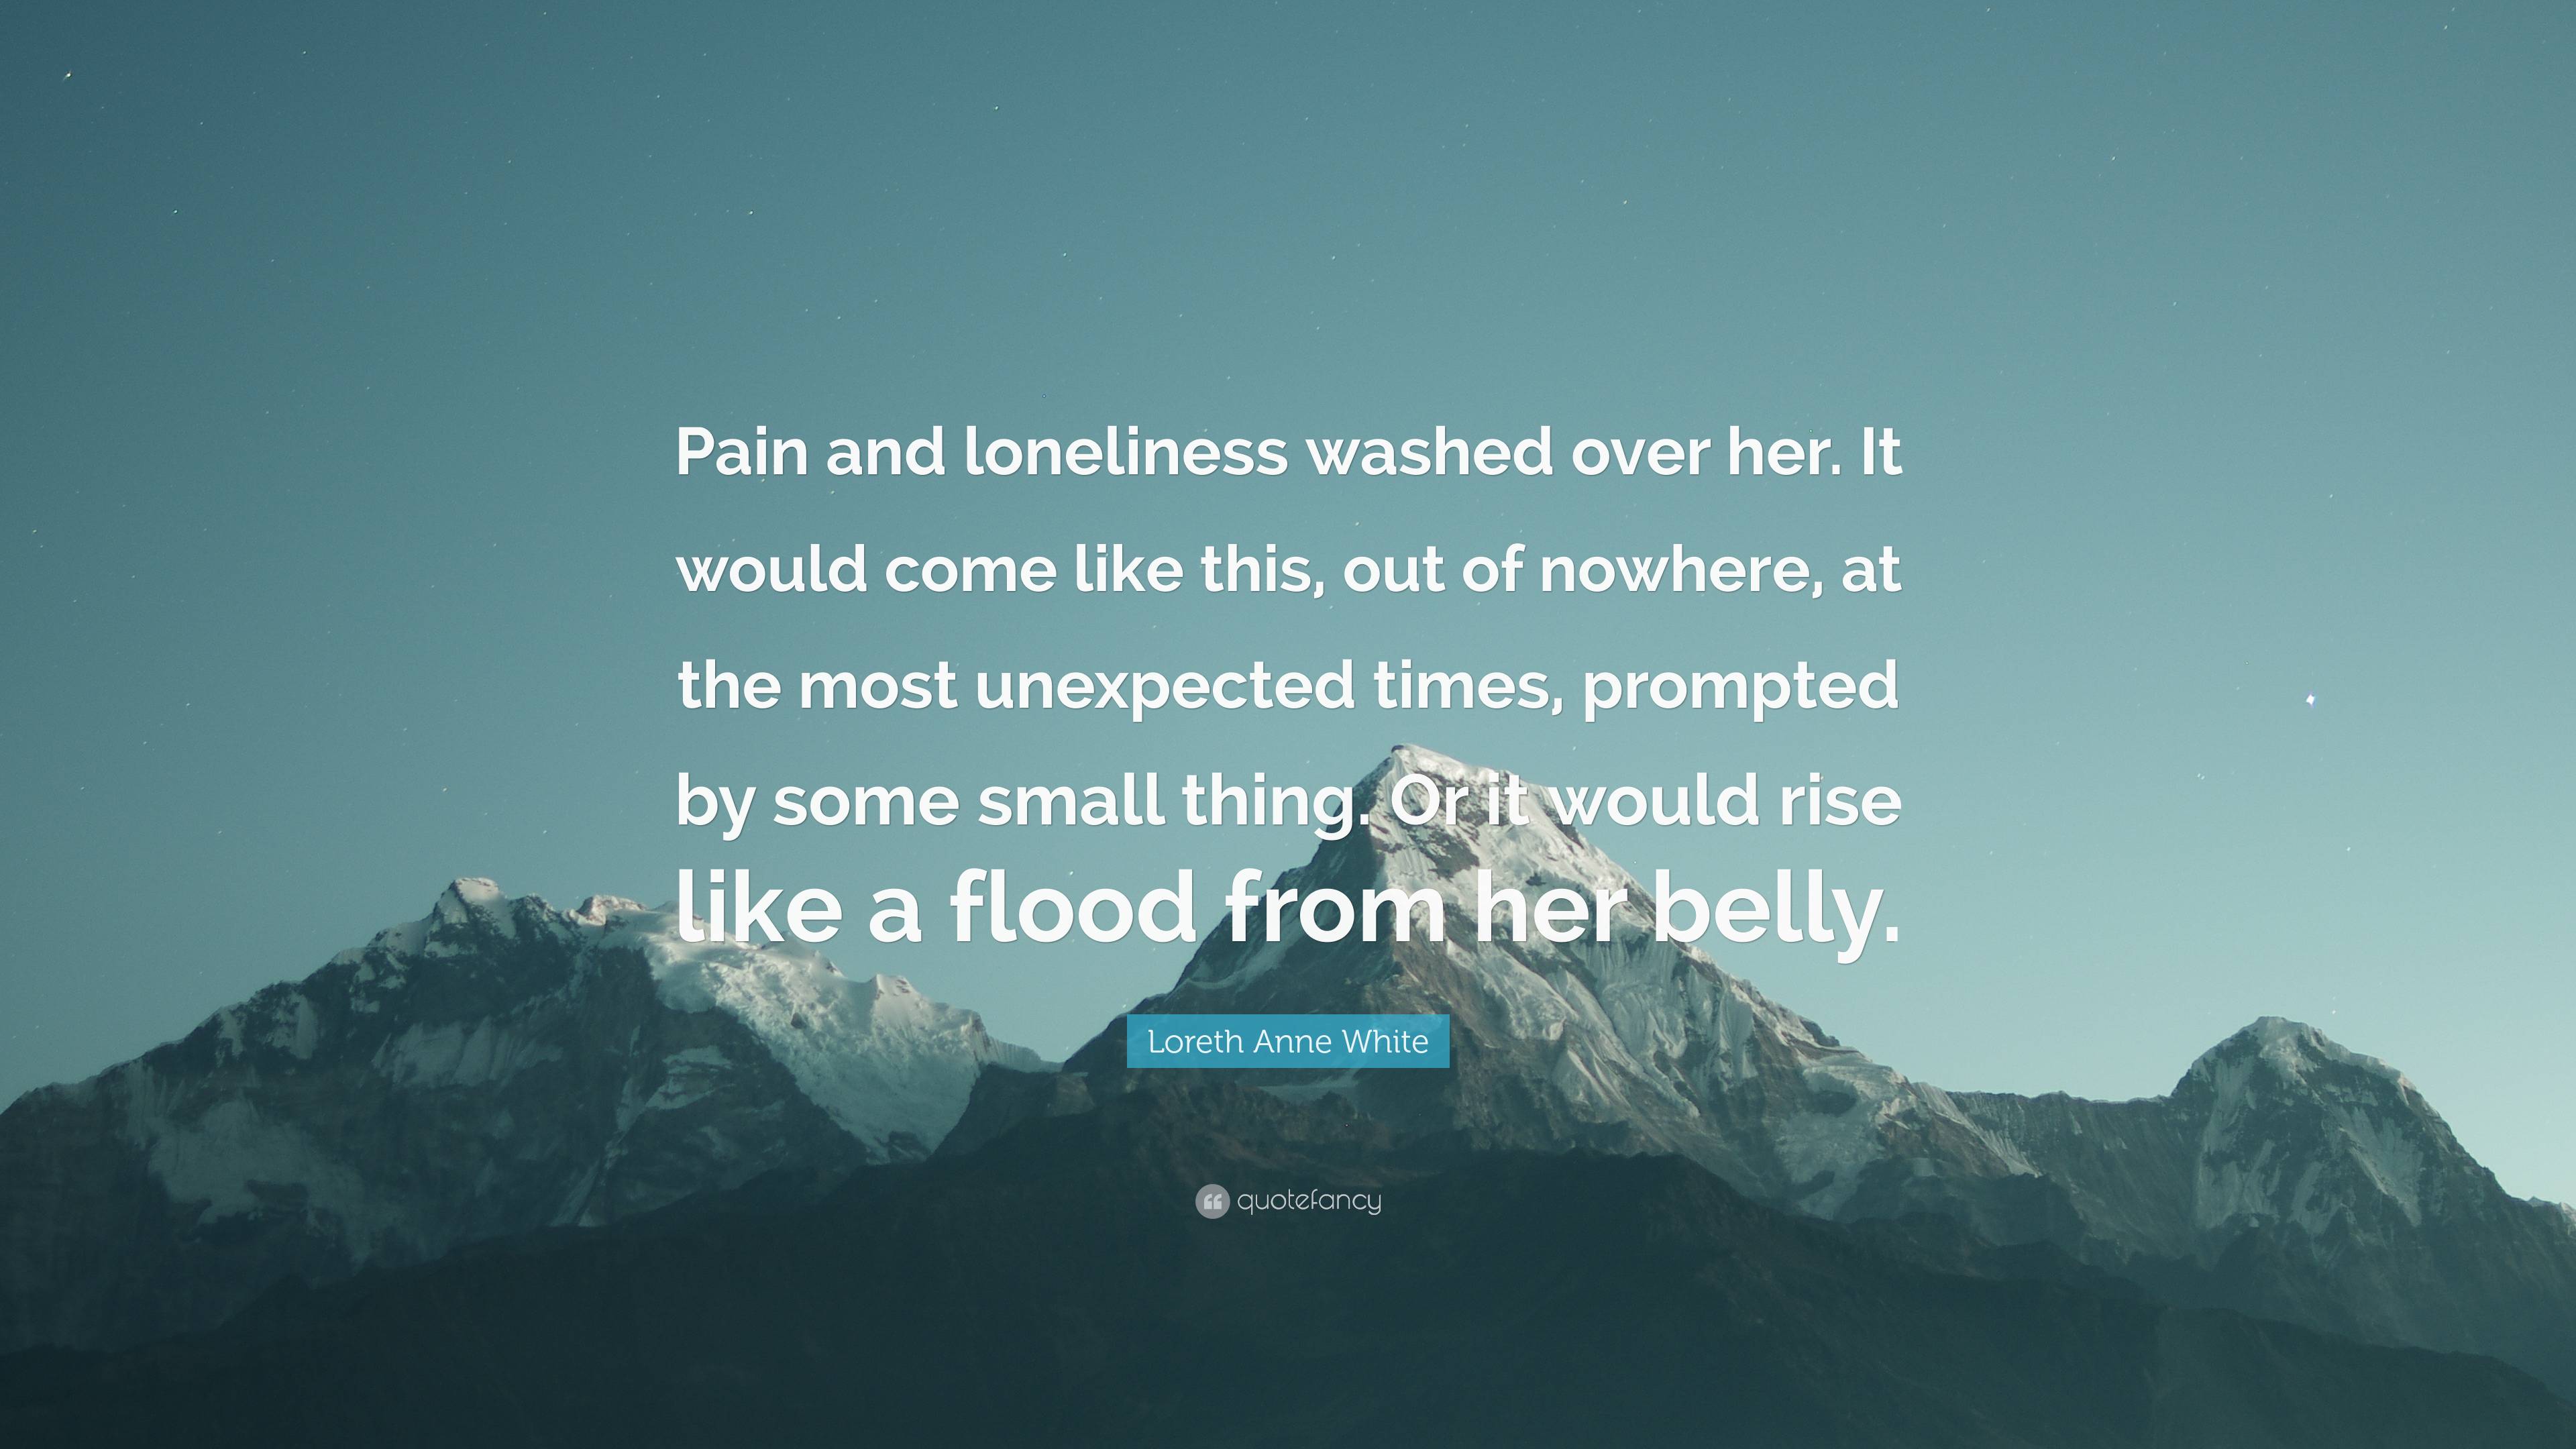 Loreth Anne White Quote: “Pain and loneliness washed over her. It